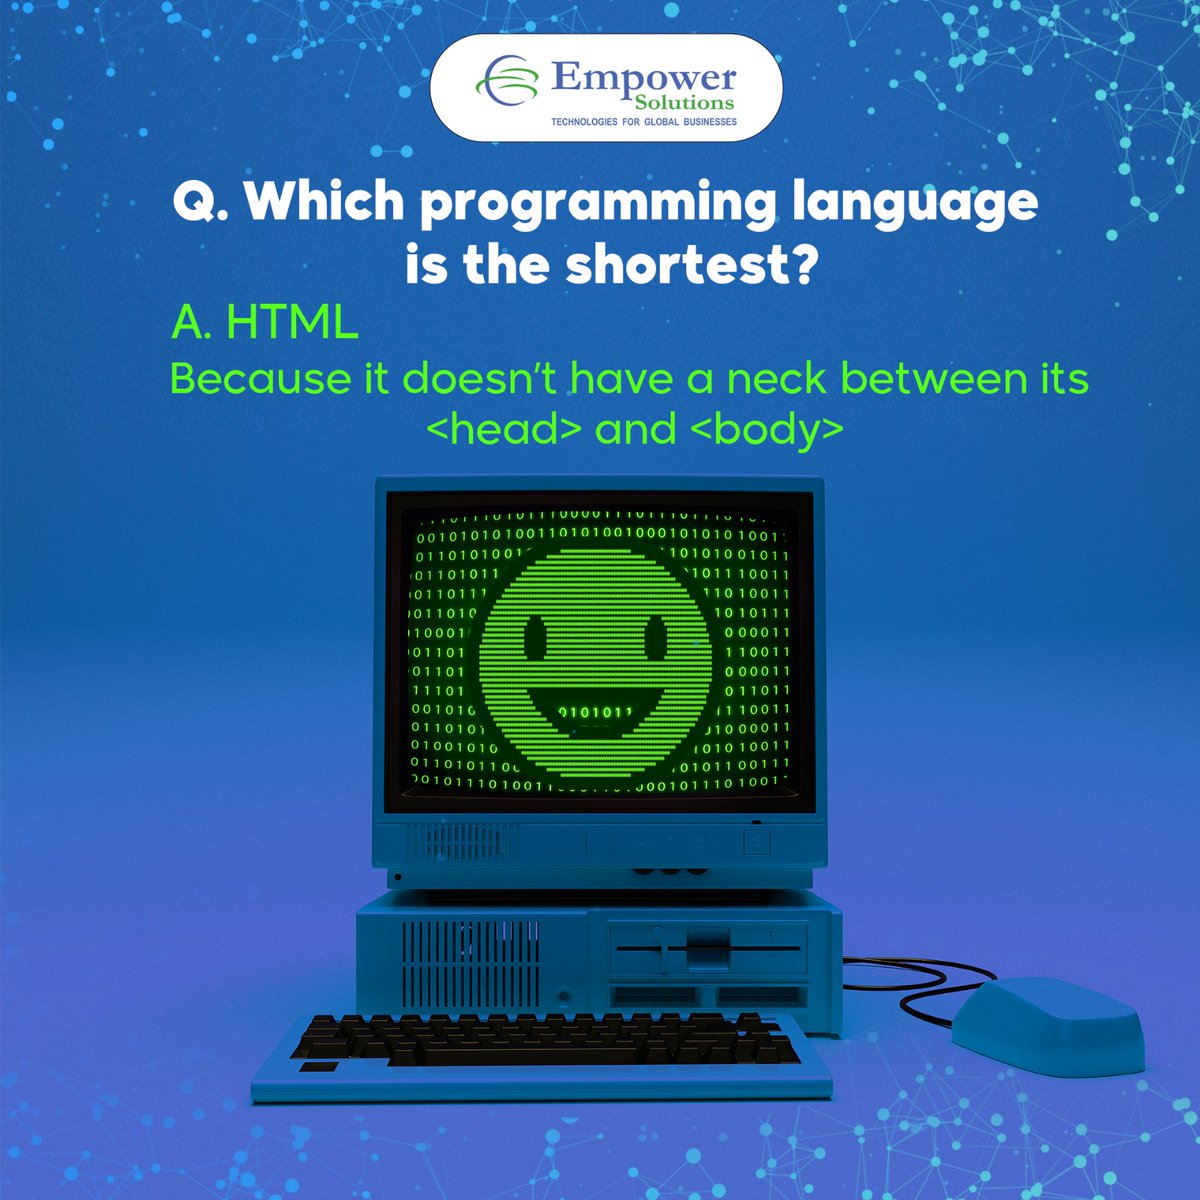 HTML Joke Alert! 😂👨‍💻 At Empower Solutions, we love to have fun with programming, and what better way to do that than with a good old joke? 
We hope this joke gave you a good laugh and brightened up your day!
 #EmpowerSolutions #ProgrammingHumor #HTMLJoke #LightMode #DarkMode